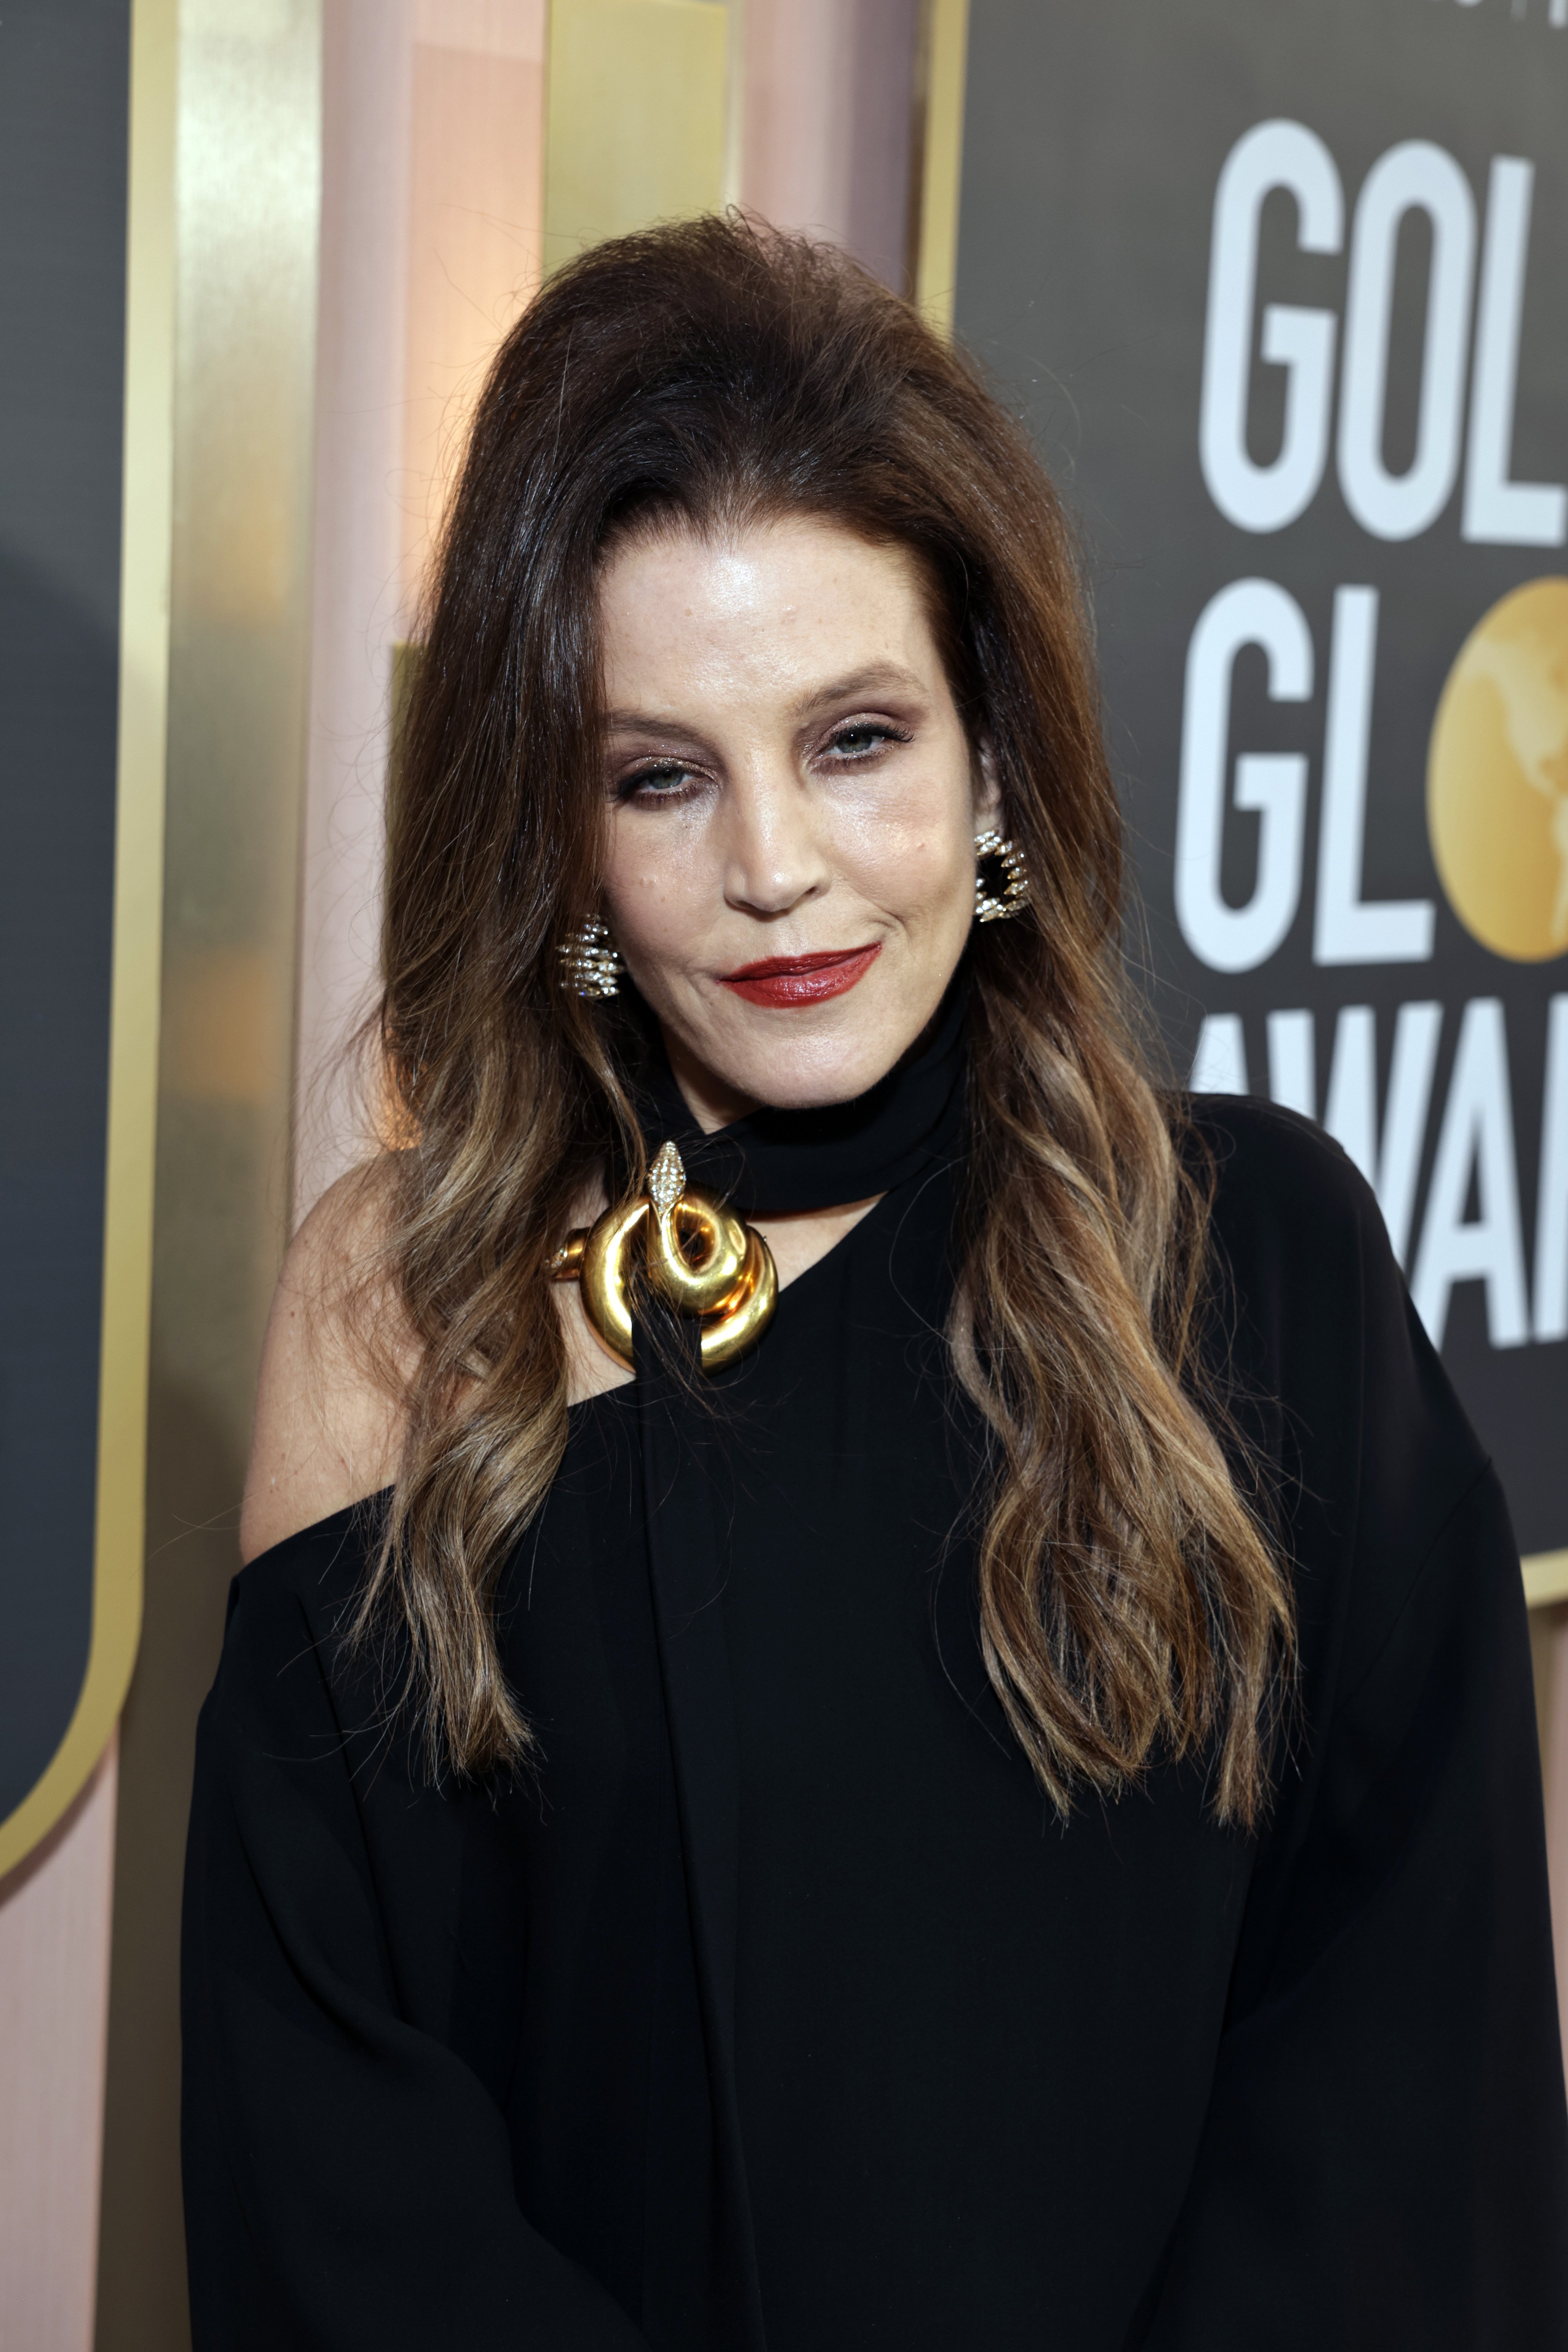 Lisa Marie Presley\\\\\\\\\\\\\\\\\\\\\\\\\\\\\\\\u00a0at the 80th Annual Golden Globe Awards\\\\\\\\\\\\\\\\\\\\\\\\\\\\\\\\u00a0on January 10, 2023, in Beverly Hills, California | Source: Getty Images